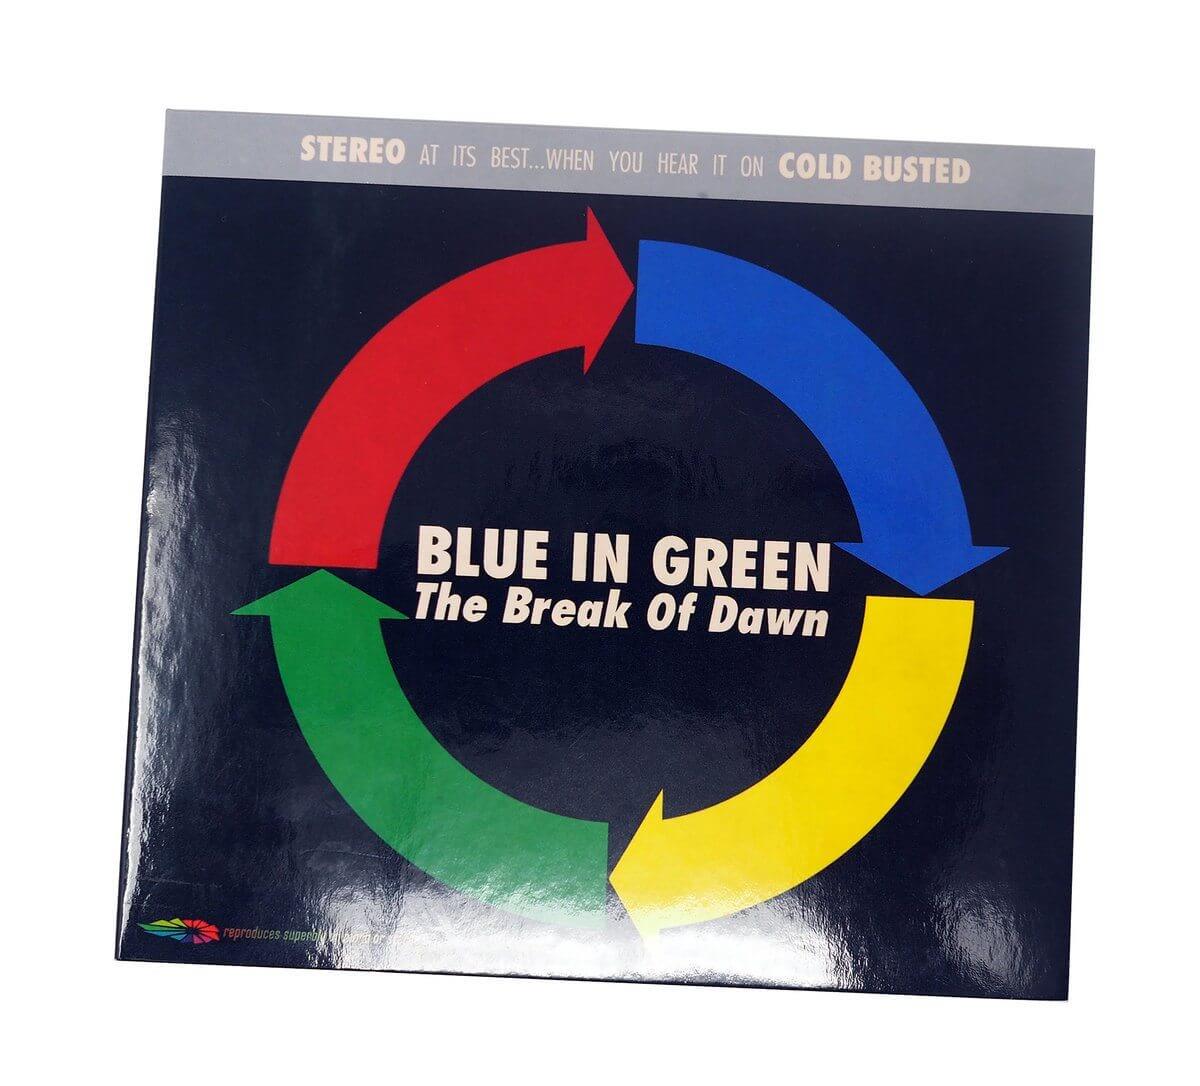 Blue In Green - The Break of Dawn (Remastered) - Limited Edition Compact Disc - Cold Busted